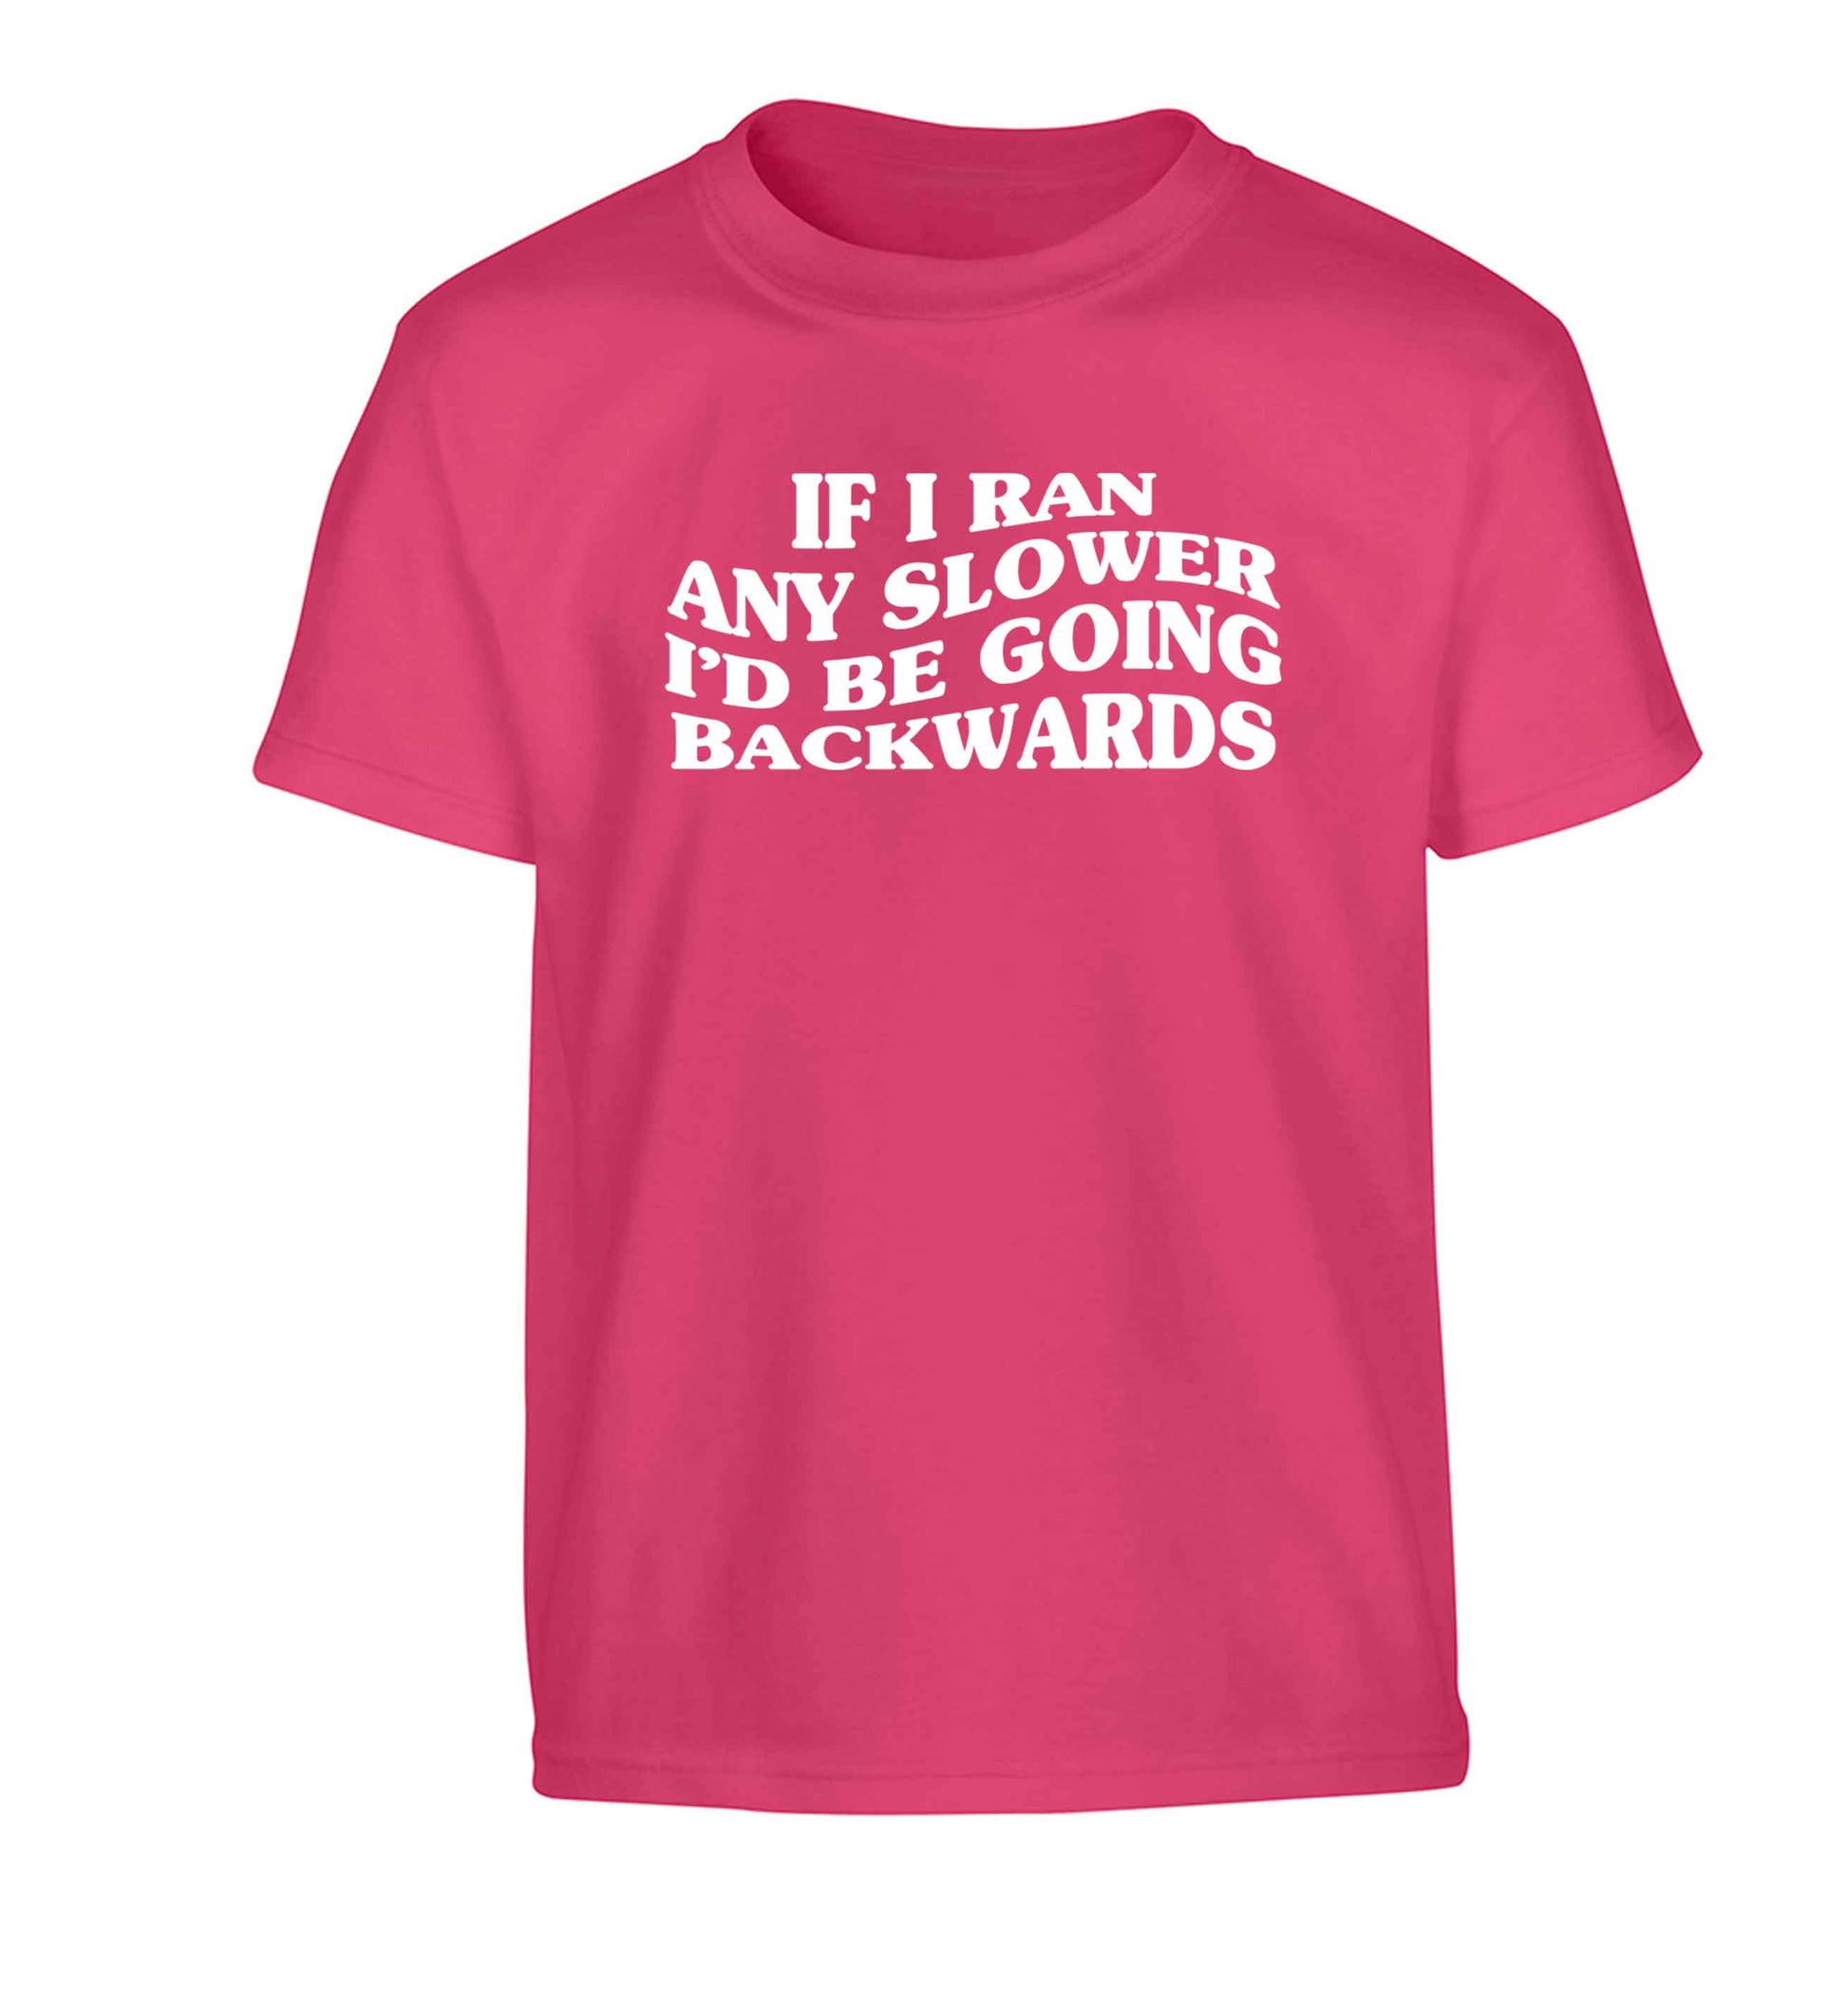 If I ran any slower I'd be going backwards Children's pink Tshirt 12-13 Years